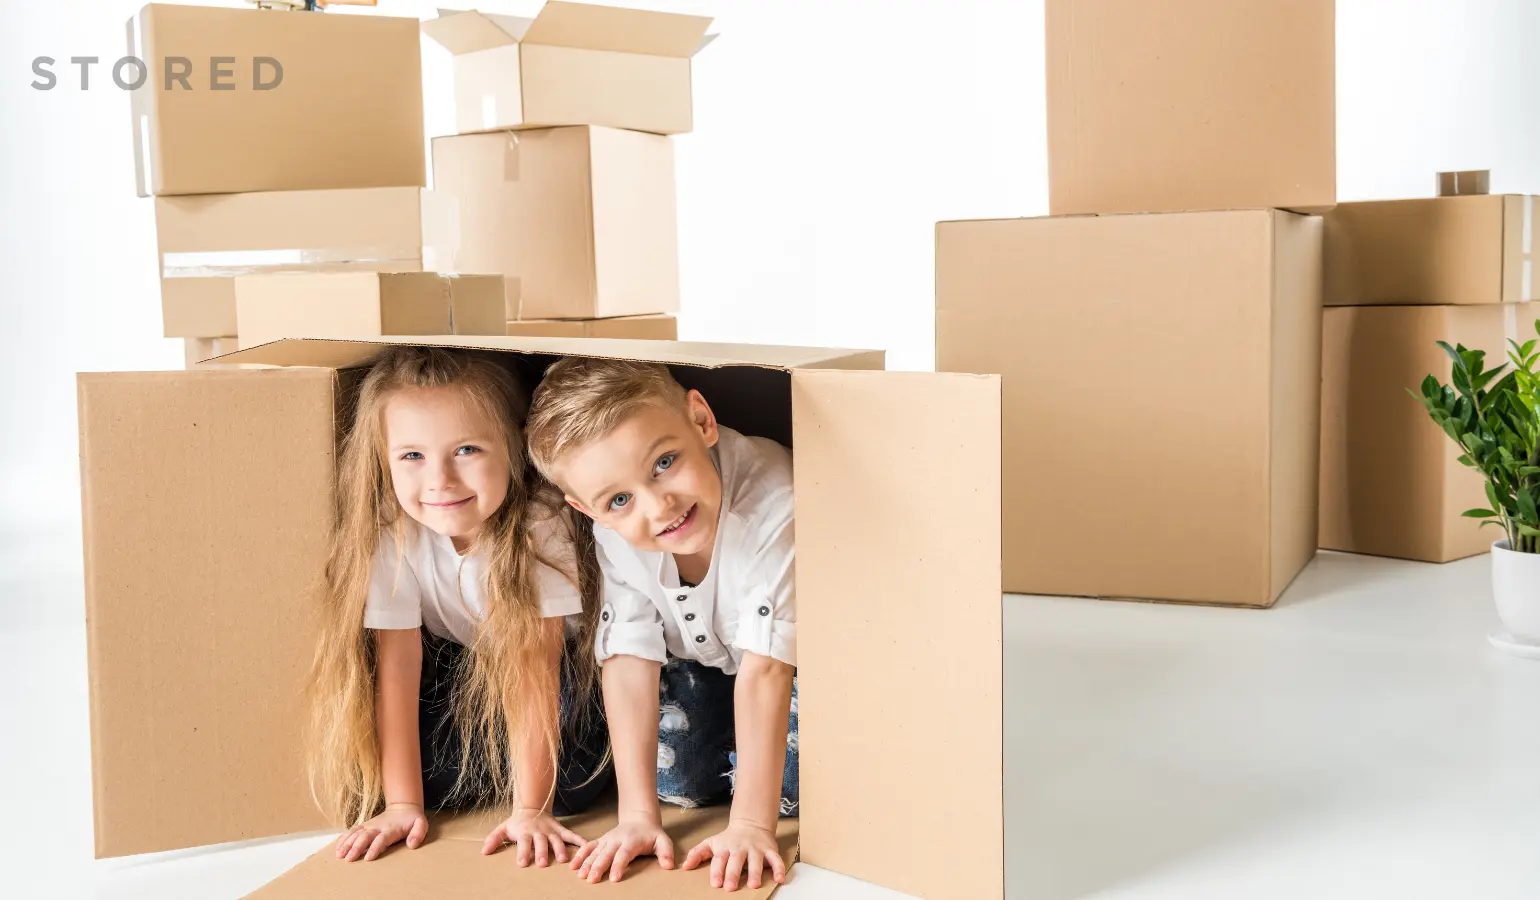 What Are the 10 Creative Ways To Use A Cardboard Box?